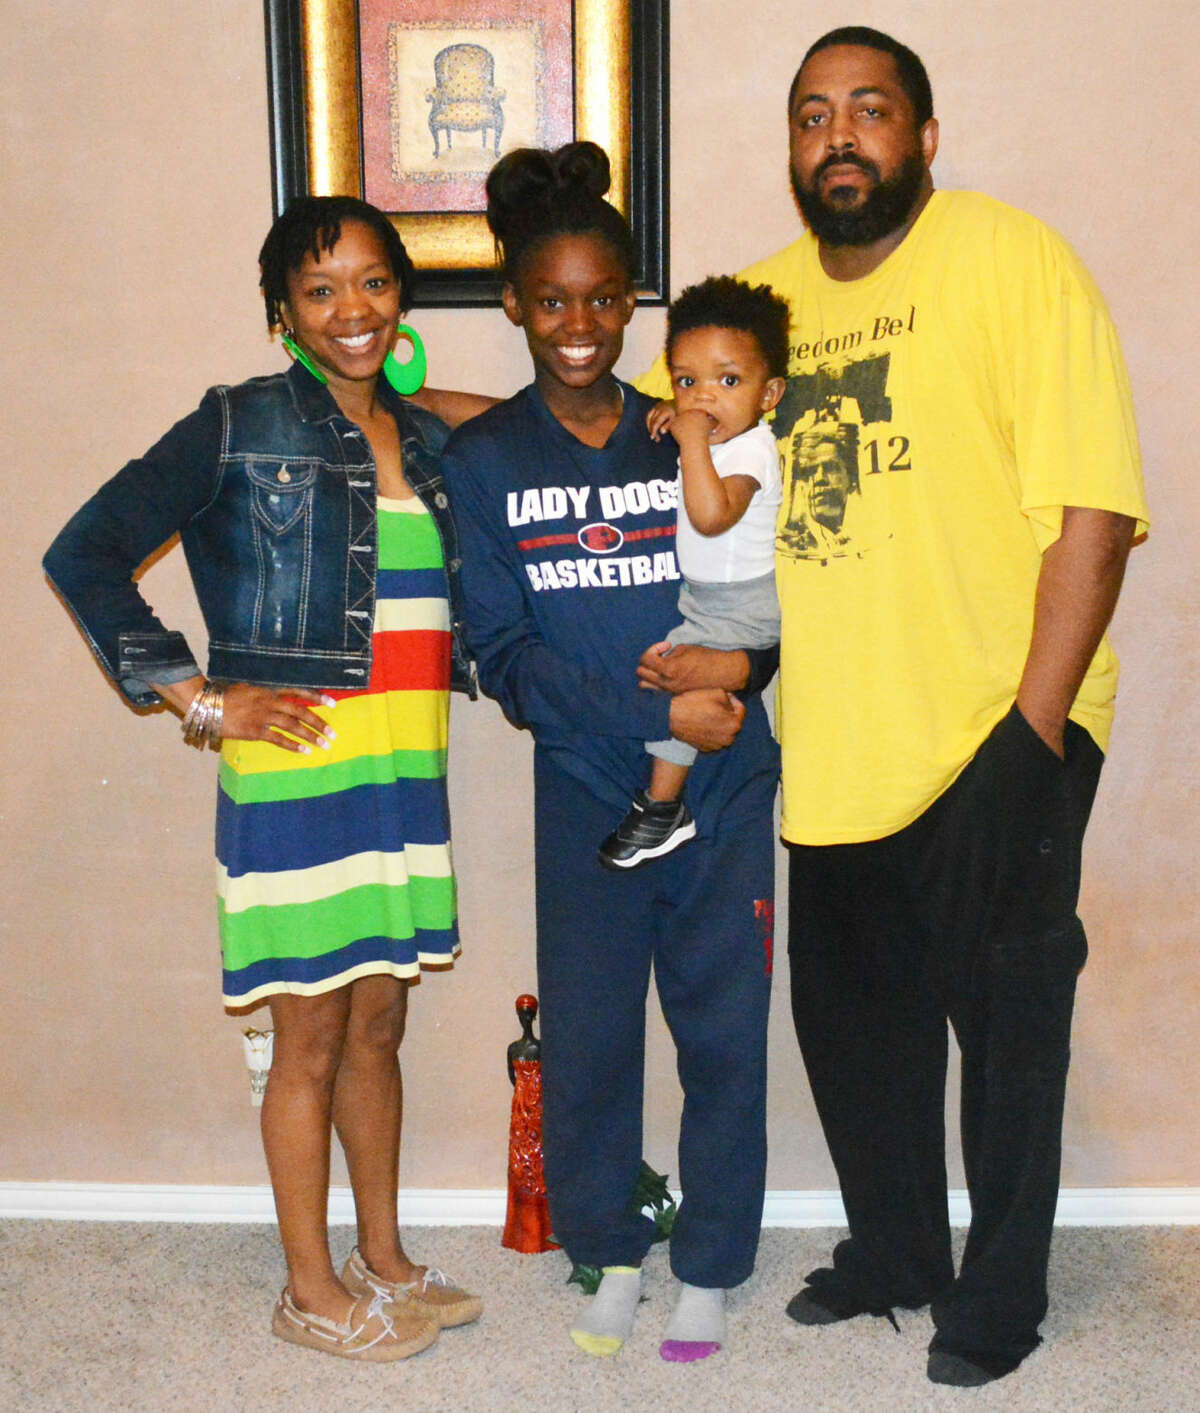 Plainview track athlete Kaizha Roberts, center, holds her brother, 11-month-old Bailor J. Myers as she is flanked by her parents, LaTosha Myers, left, and Bennie "B.J." Myers, right. Roberts, a Plainview High School sophomore, will have a chance to go to Australia and compete in a track meet in July as part of the Down Under Sports program.